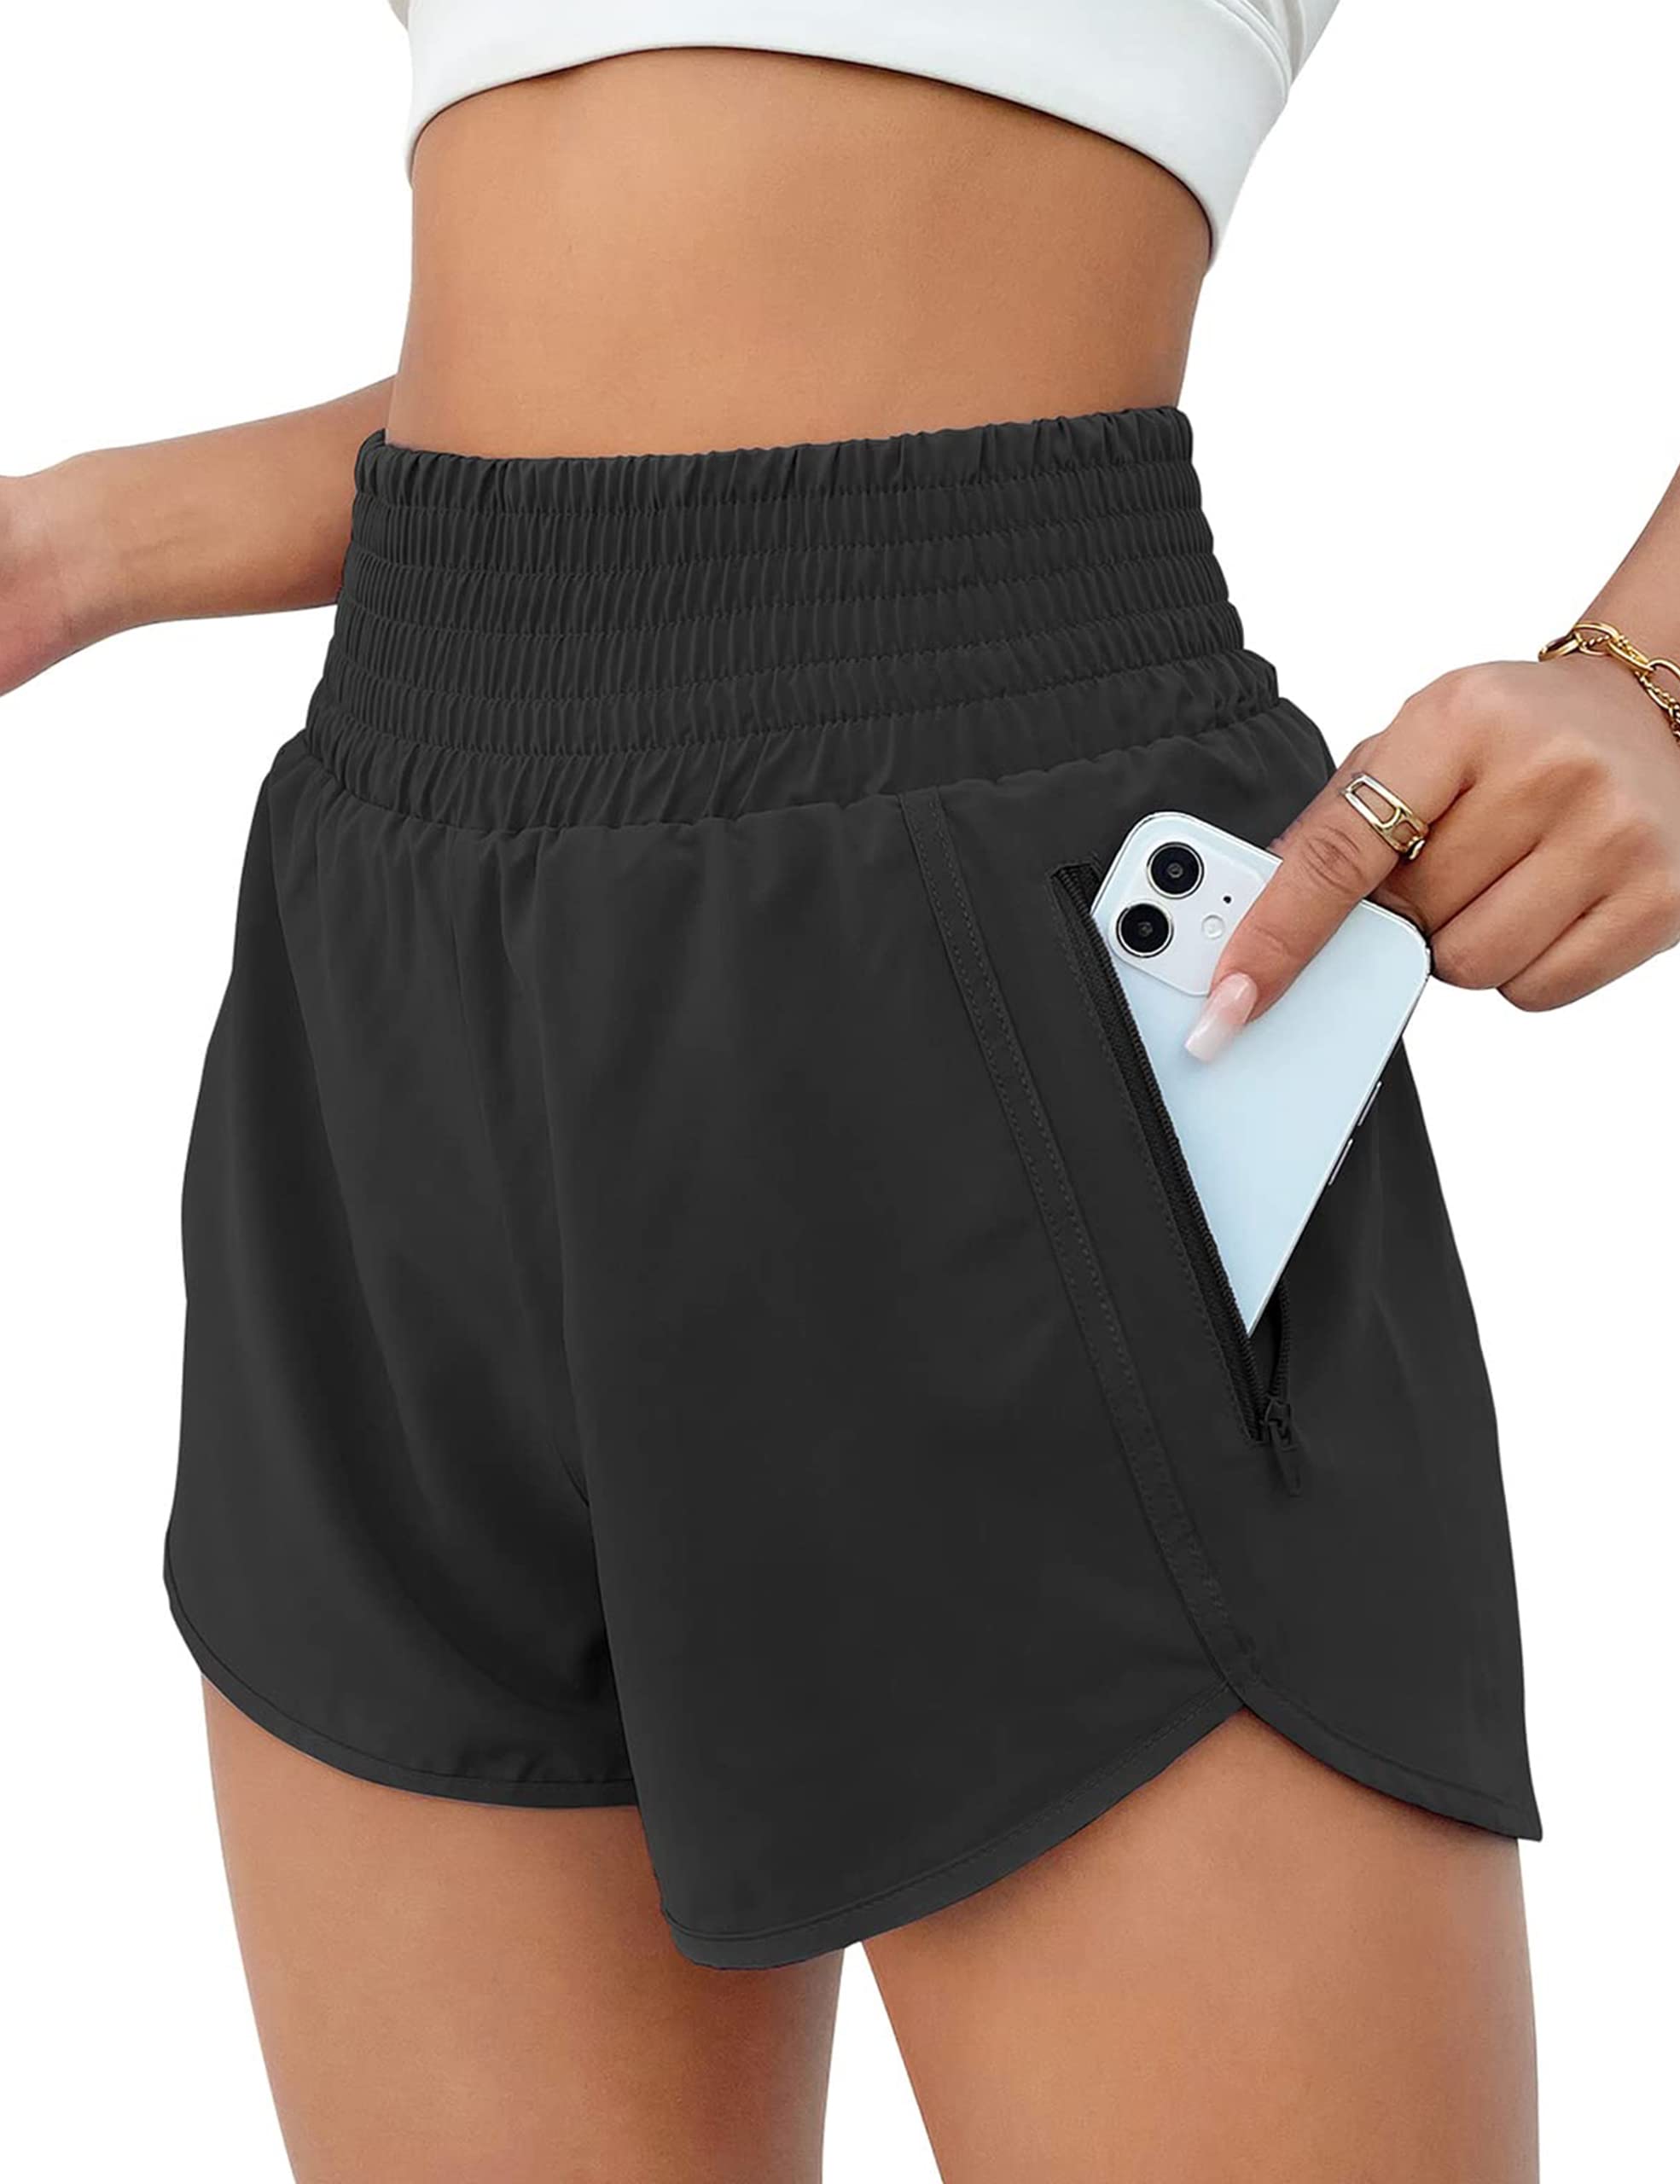 Women's Quick-Dry Workout Sports Running Yoga Athletic Shorts Built-in  Panties